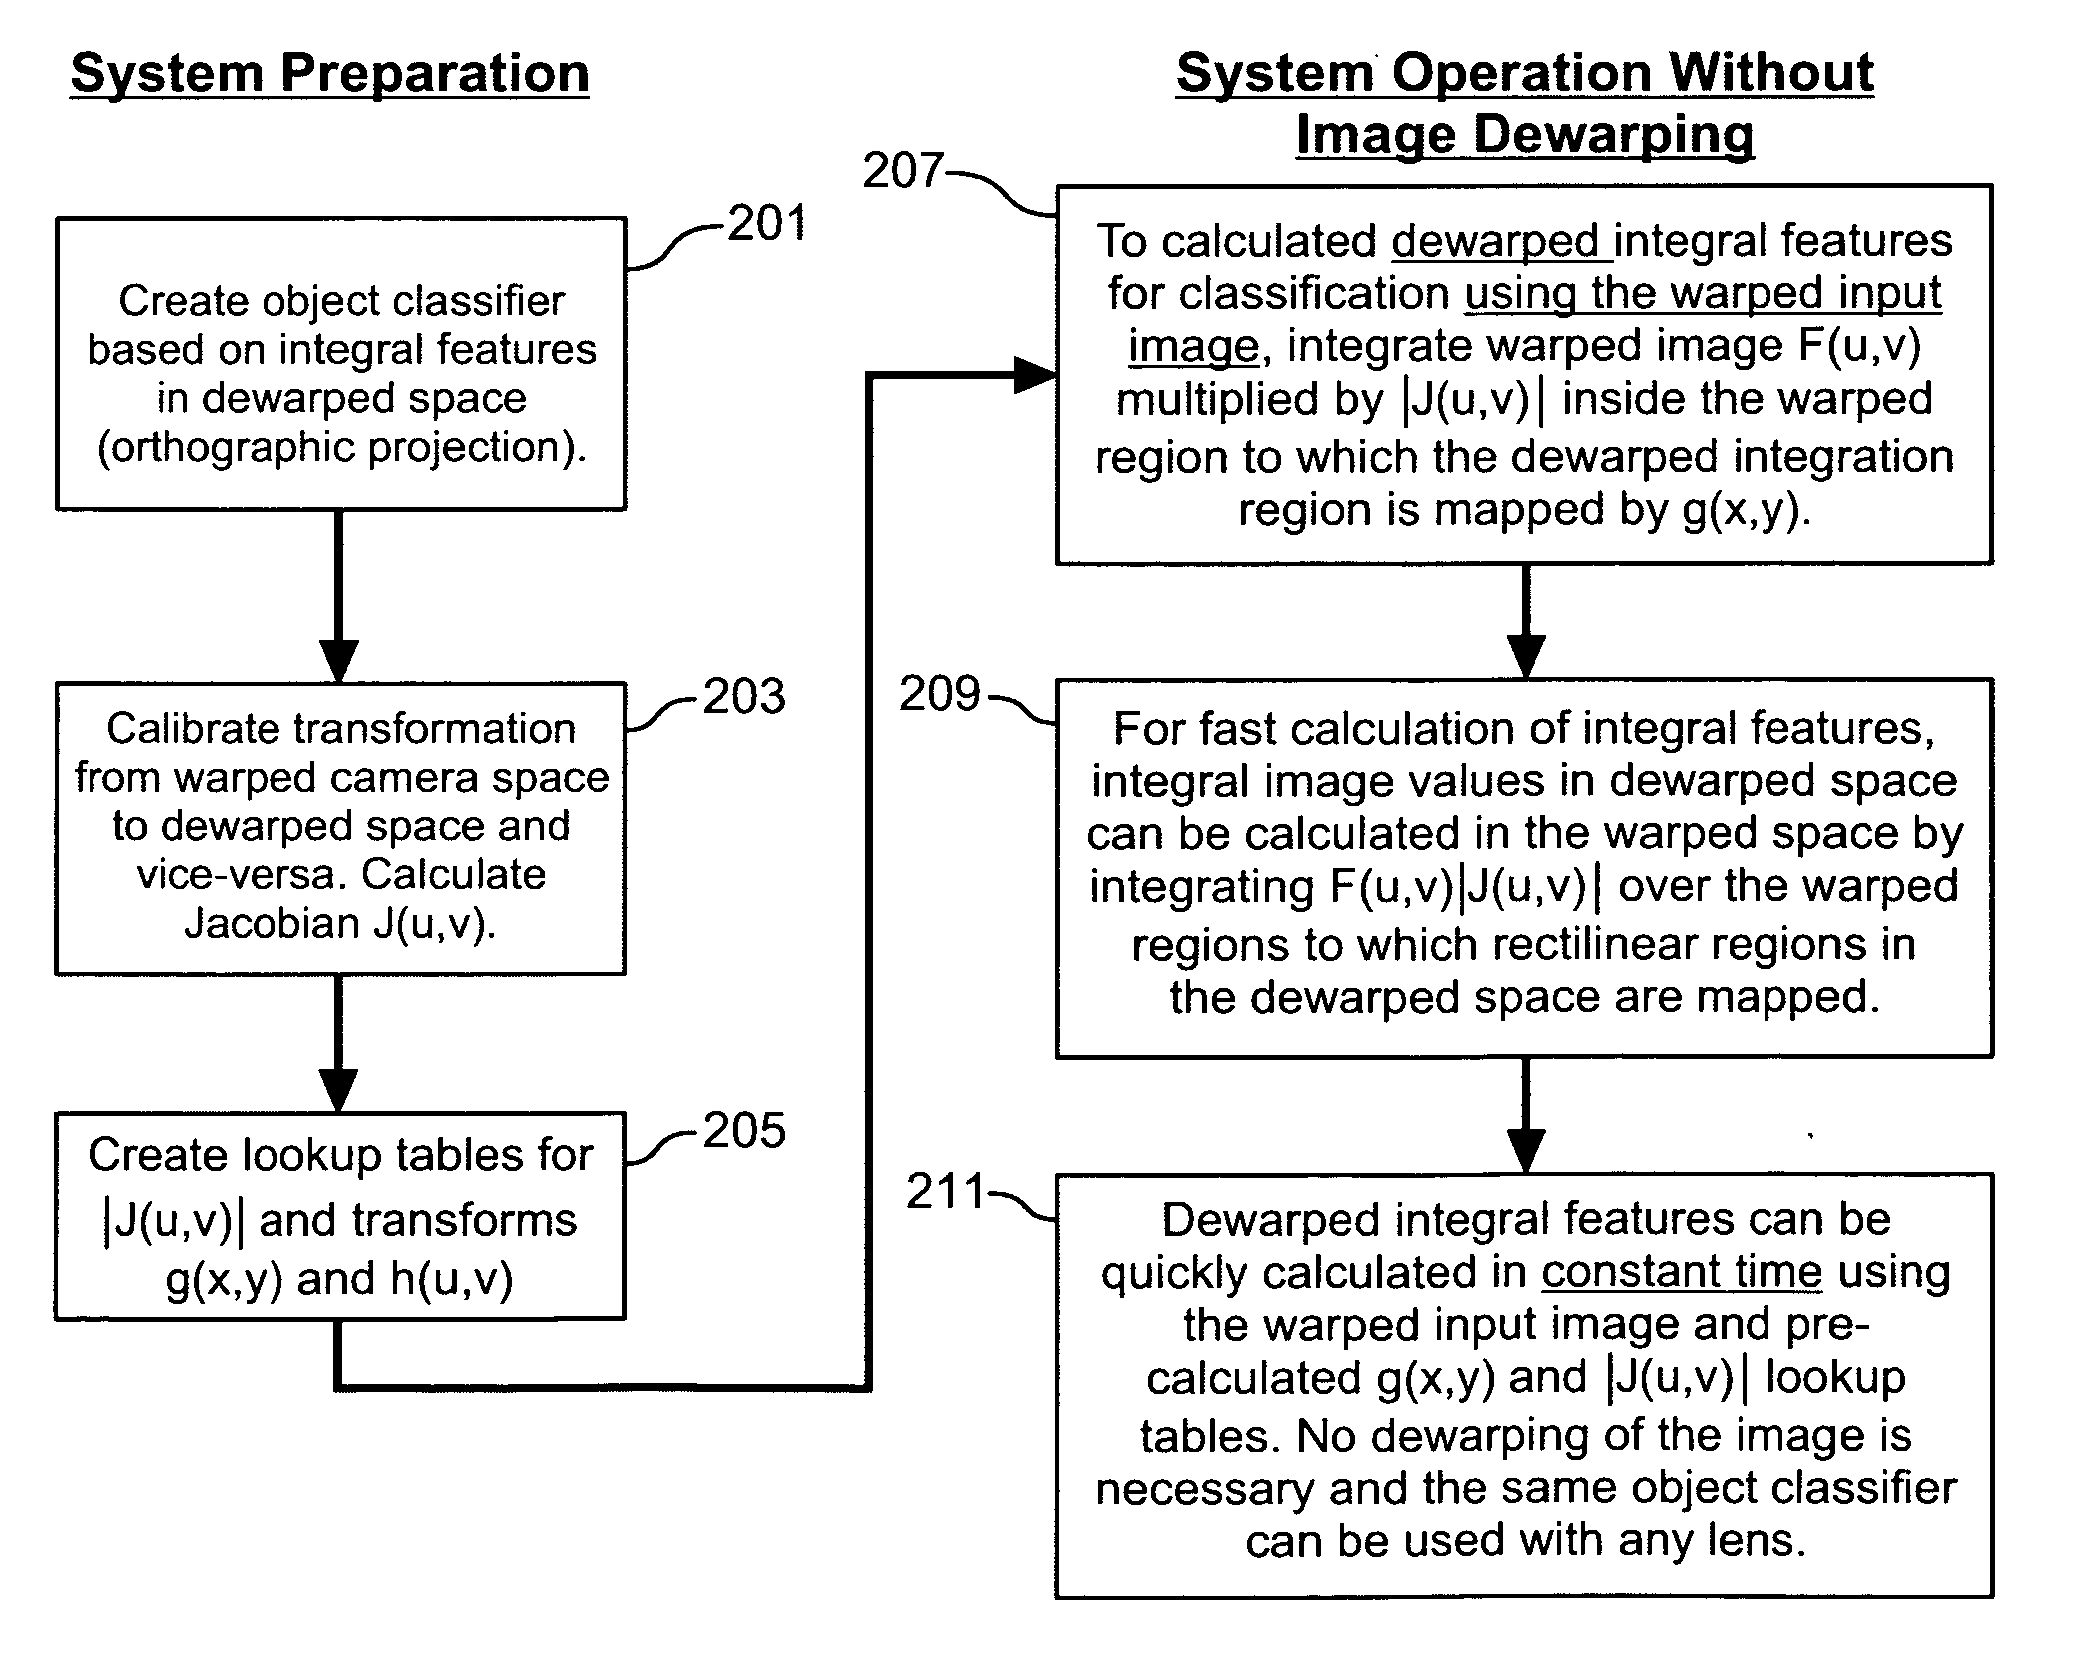 Method for warped image object recognition